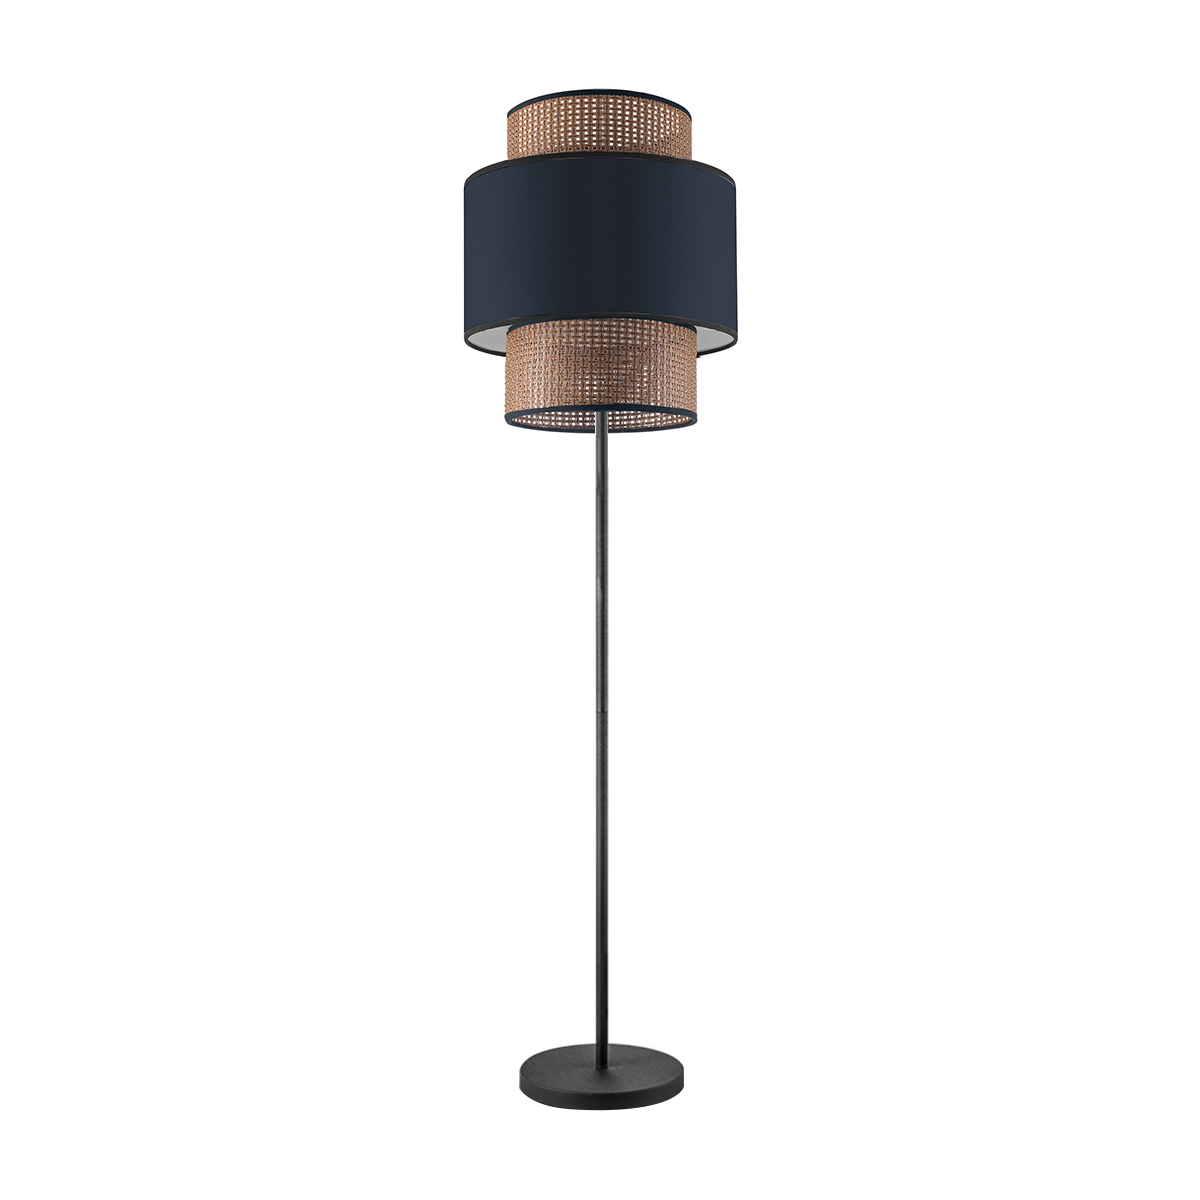 Tangla lighting - TLF7014-30BL - LED floor lamp 1 Light - metal and natural rattan and TC fabric in natural and blue - night - E27